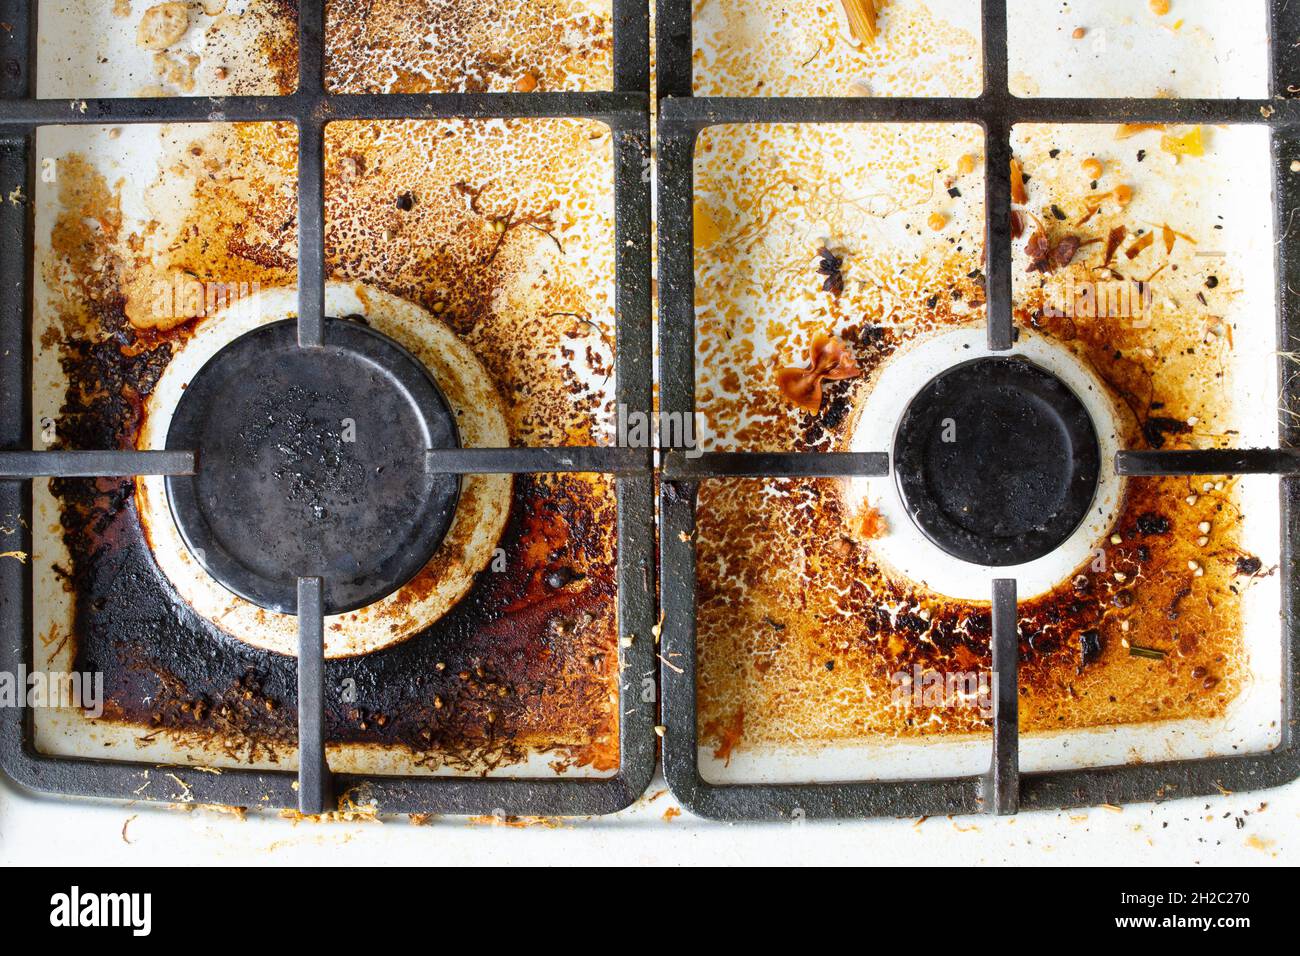 Dirty gas stove surface. Two gas burners and cast iron grate of a gas oven surrounded by old leftovers of food and drinks. Top area surface and burner Stock Photo